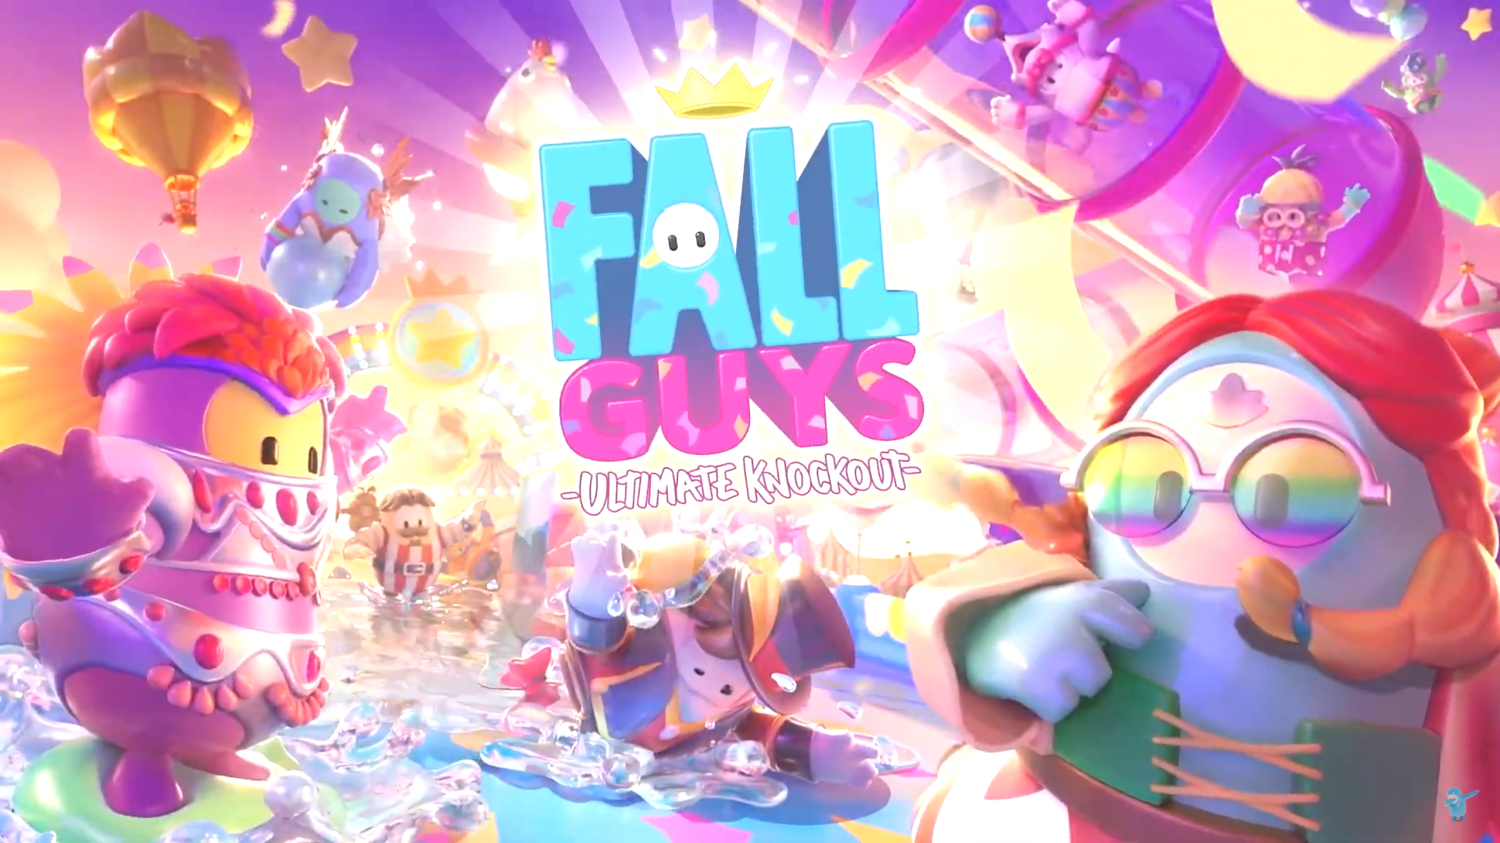 Is Fall Guys Ultimate Knockout Crossplay or Cross Platform? [2023